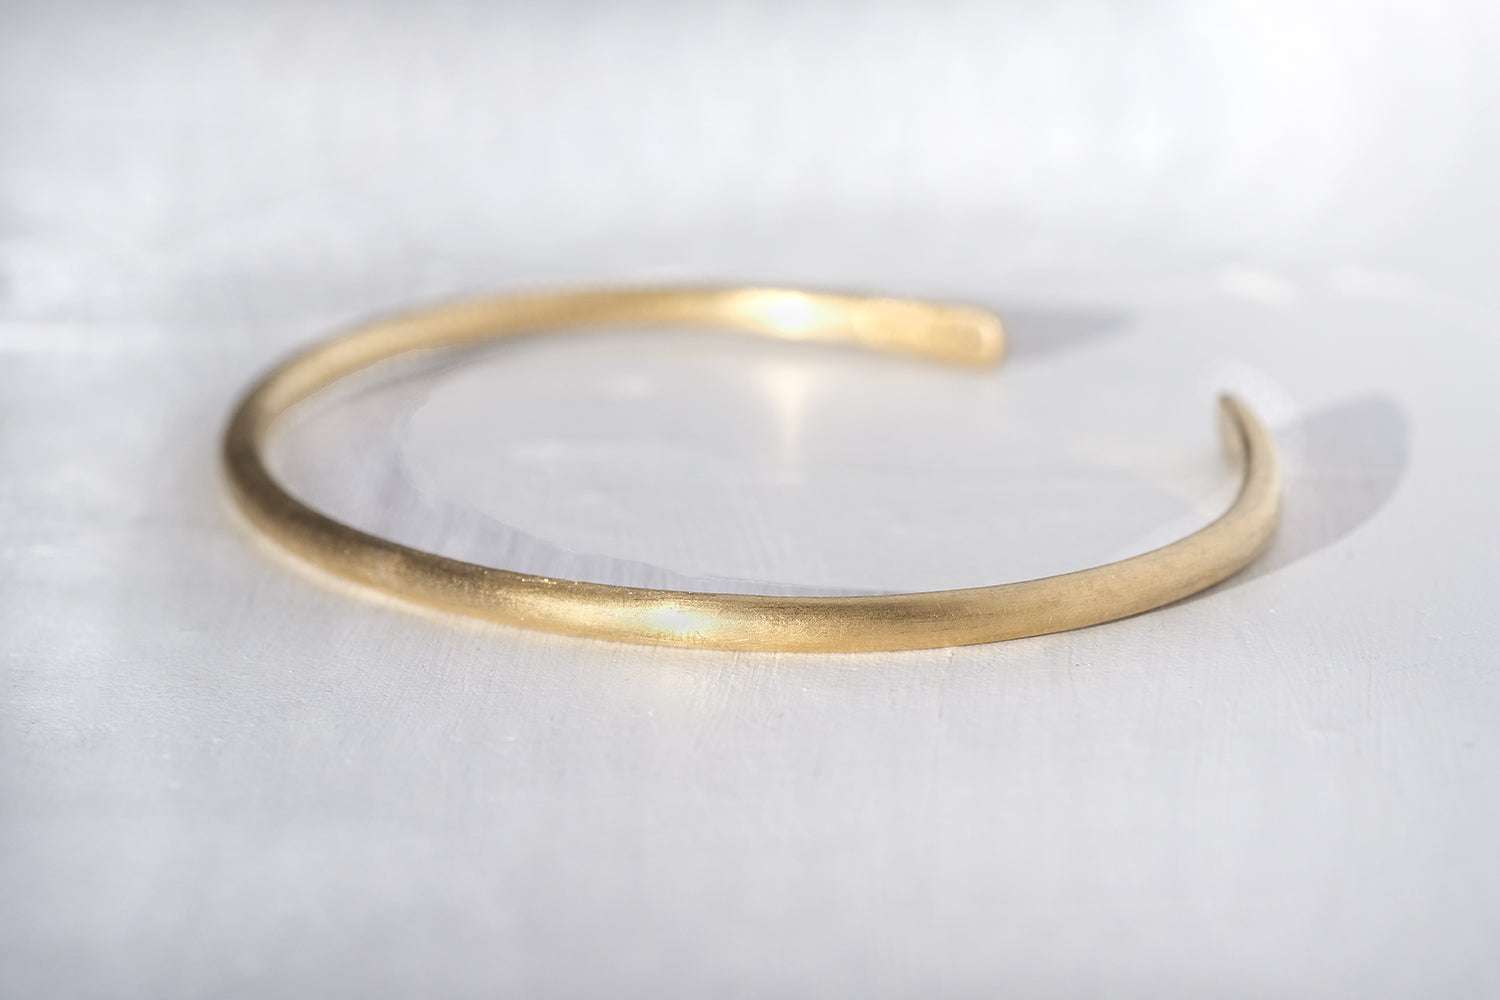 Gold Bracelet For Men - Thin And Smooth 